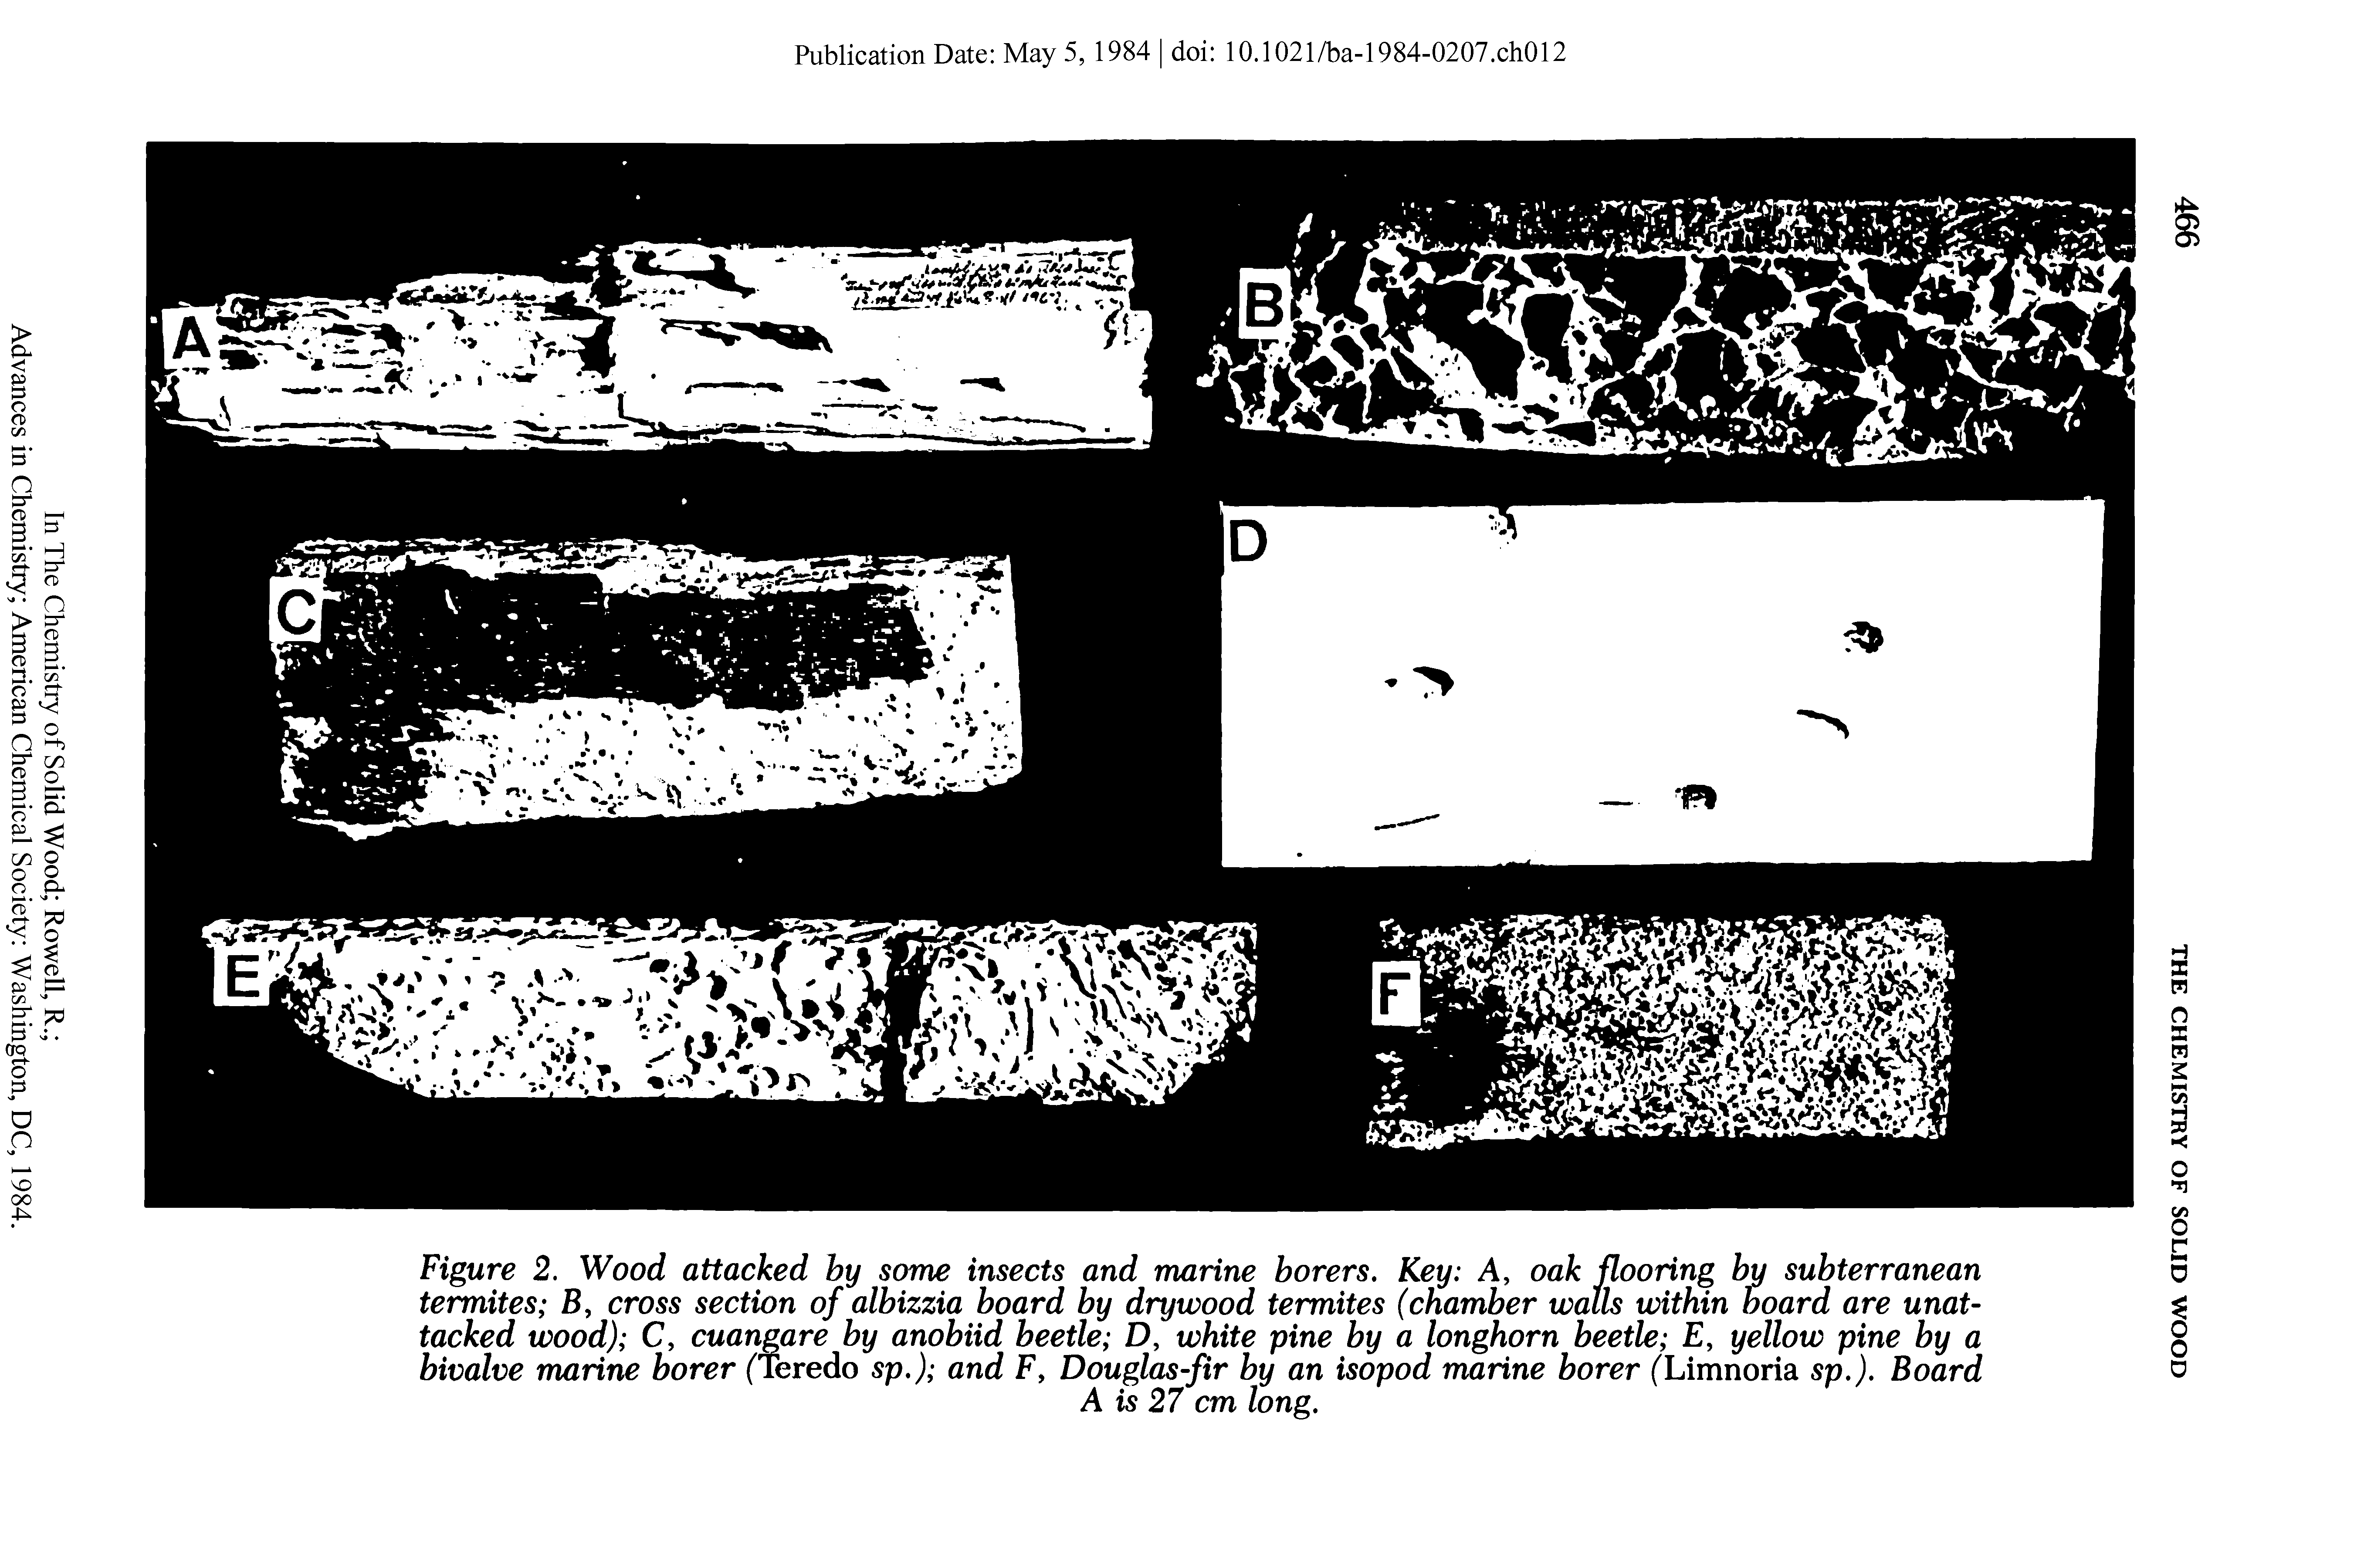 Figure 2. Wood attacked by some insects and marine borers. Key A, oak flooring by subterranean termites B, cross section of albizzia board by drywood termites (chamber walls within board are unattacked wood) C, cuangare by anobiid beetle D, white pine by a longhorn beetle , yellow pine by a bivalve marine borer ("Teredo sp.) and F, Douglas-fir by an isopod marine borer ( Limnoria sp.). Board...